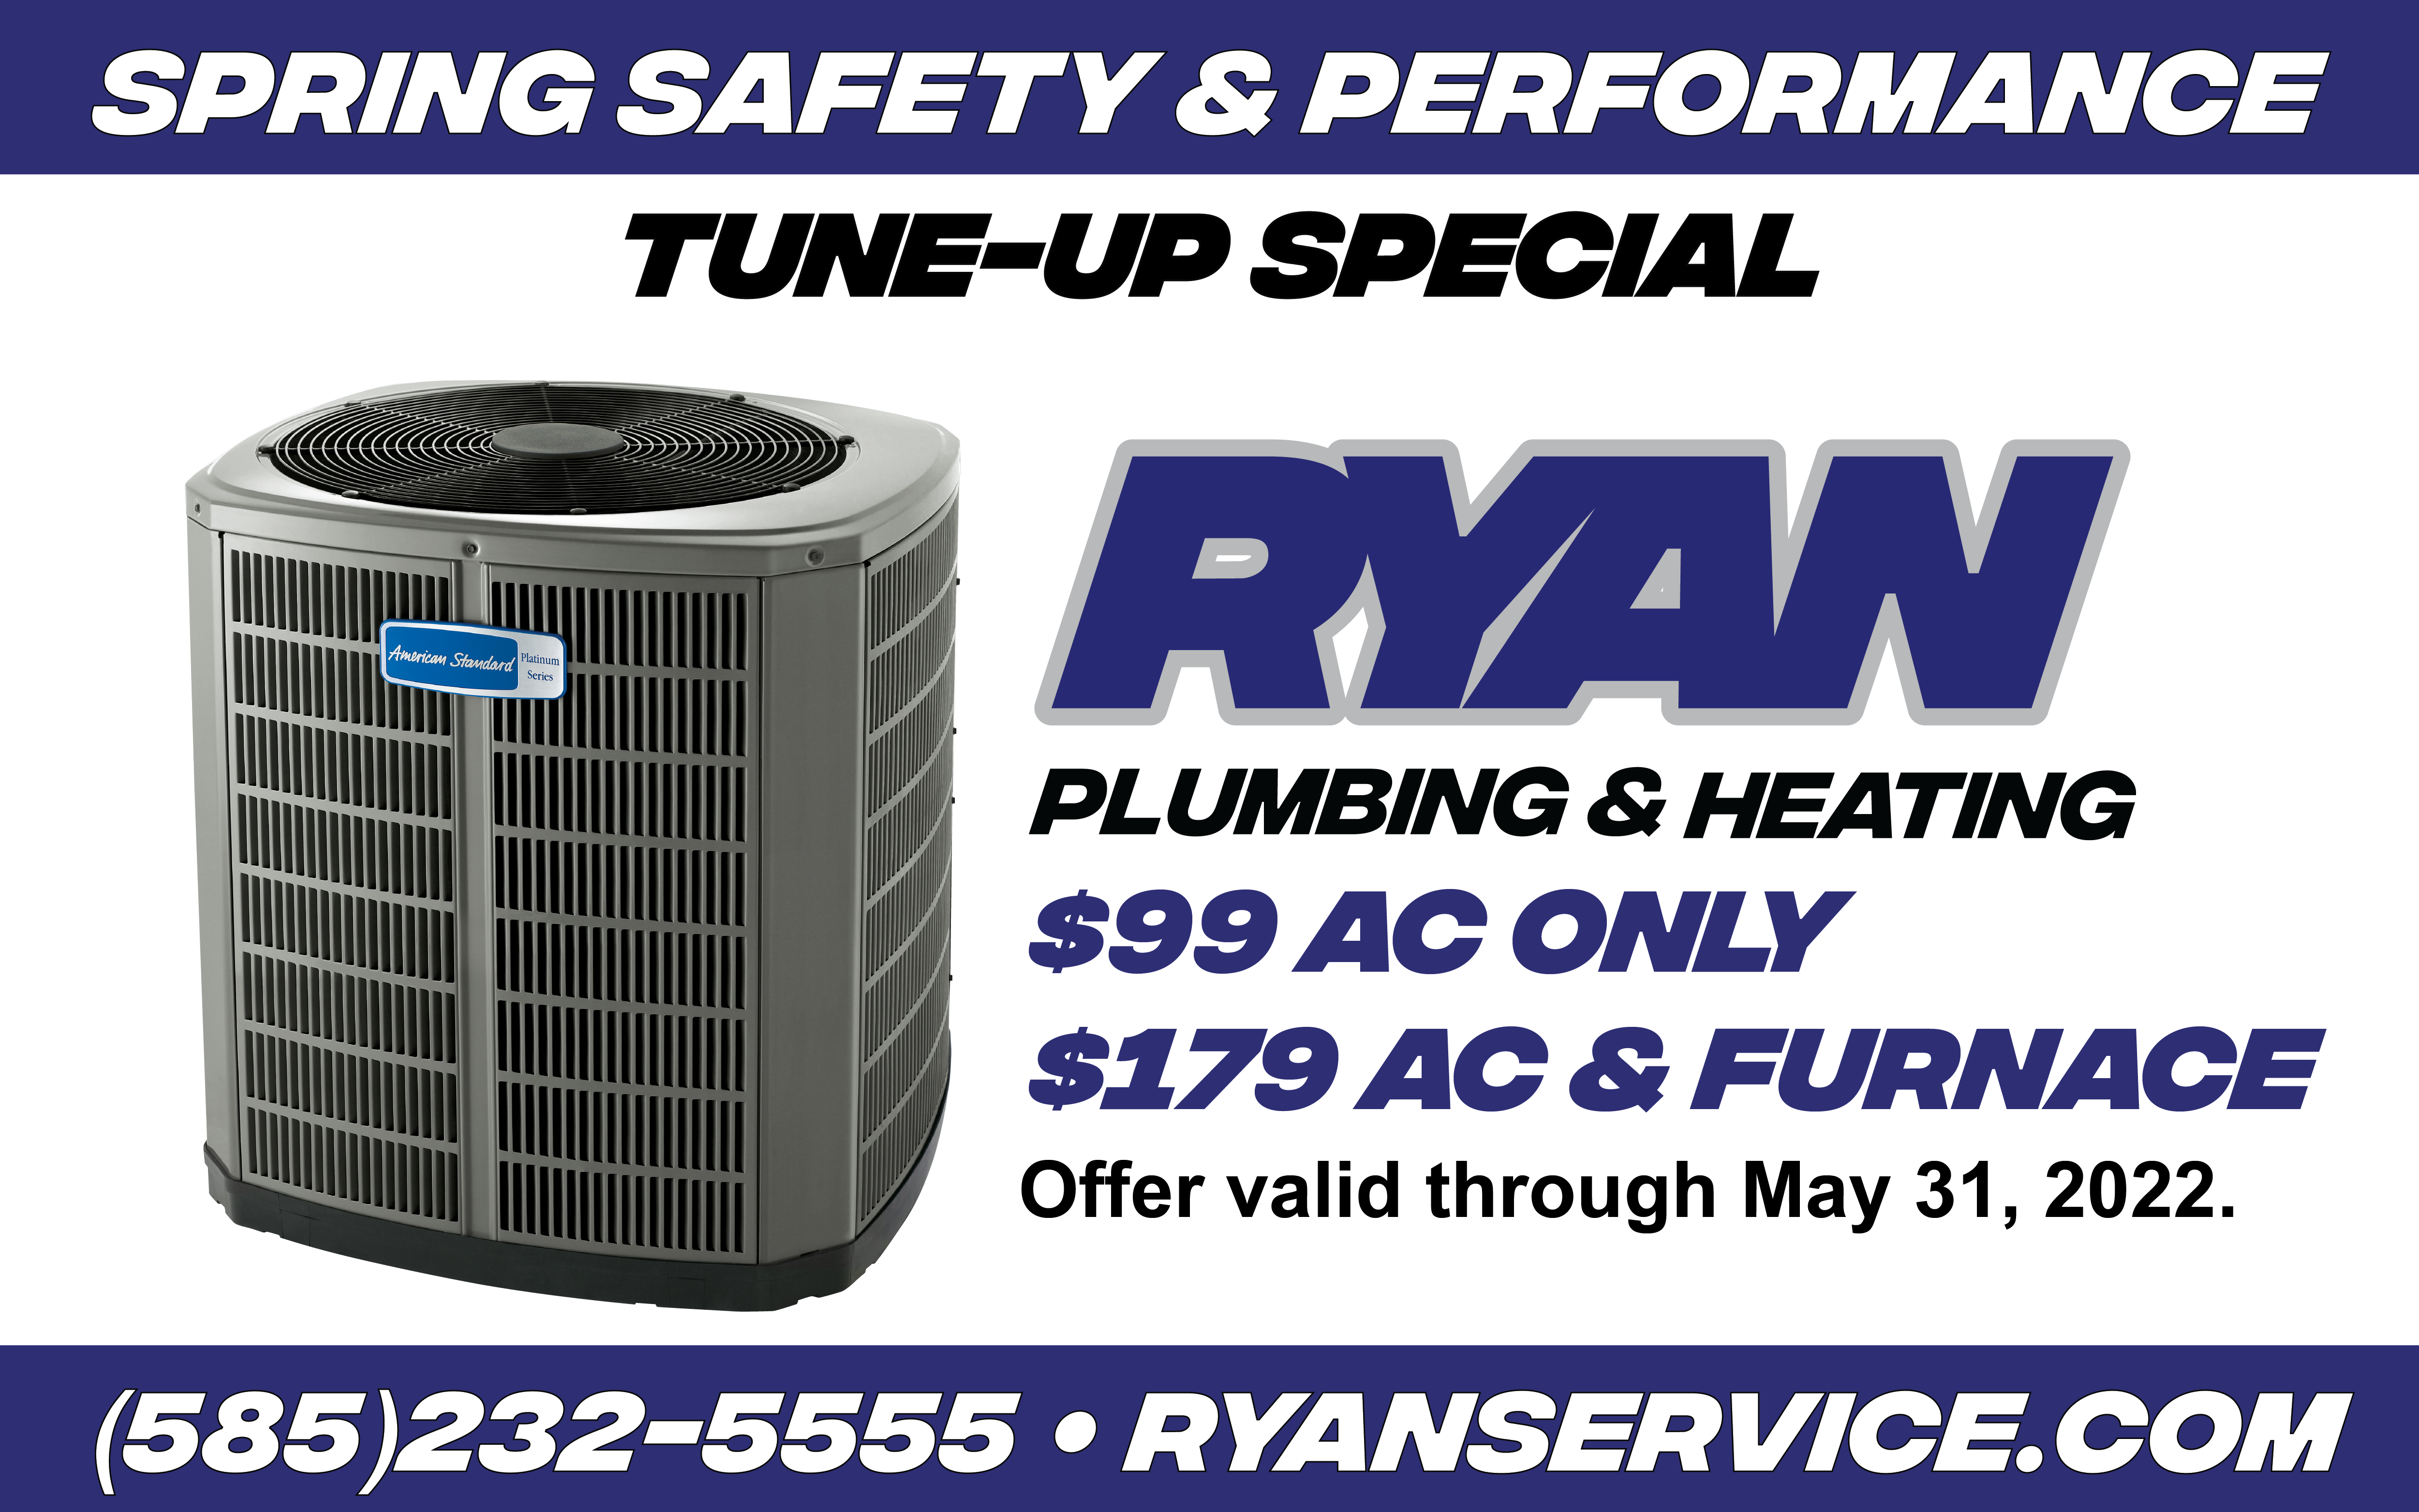 Spring Safety & Performance Tune-up Special 2022